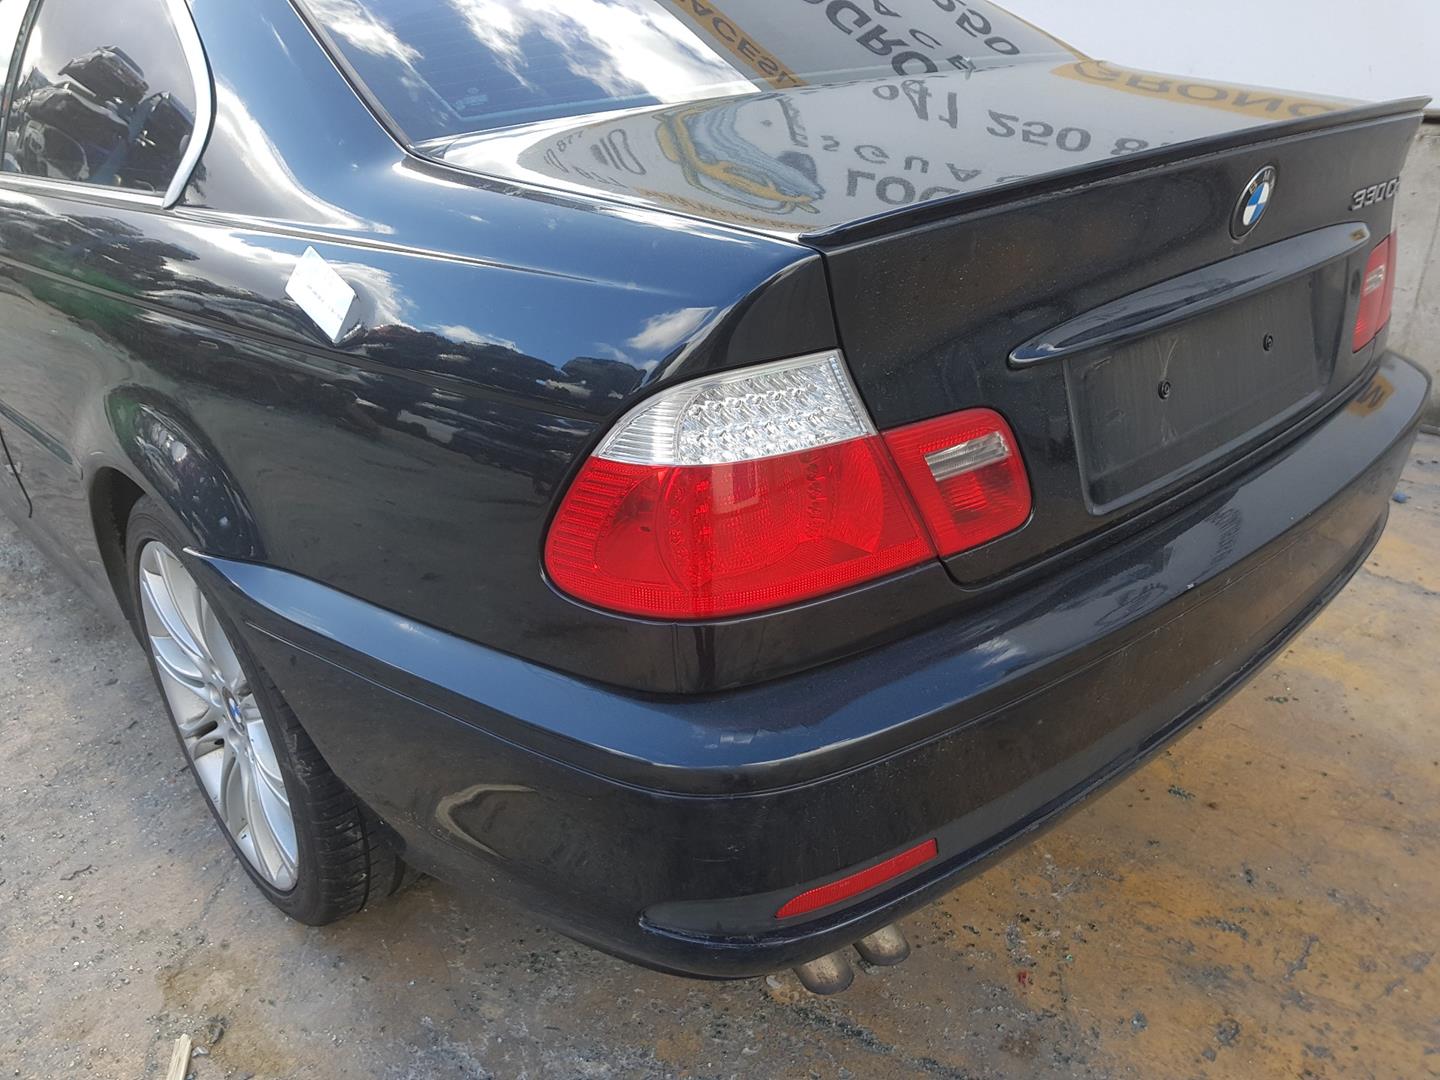 BMW 3 Series E46 (1997-2006) Other Interior Parts 63318364929, 63318364929 19792317